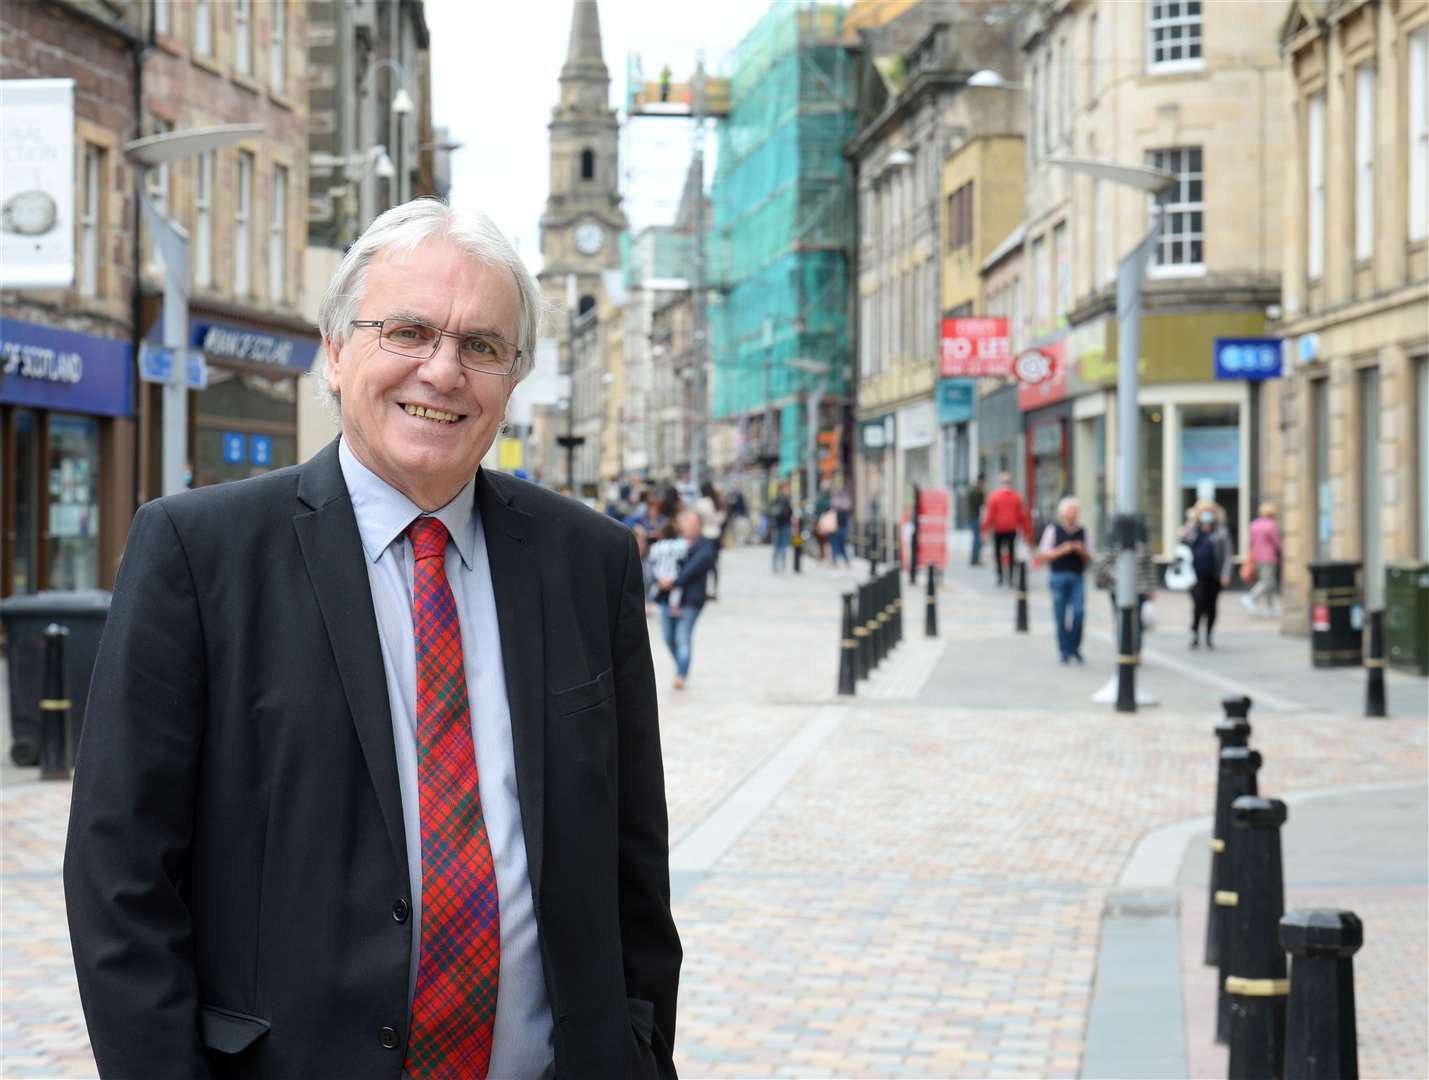 Former Inverness Depute provost Graham Ross has died, aged 67.